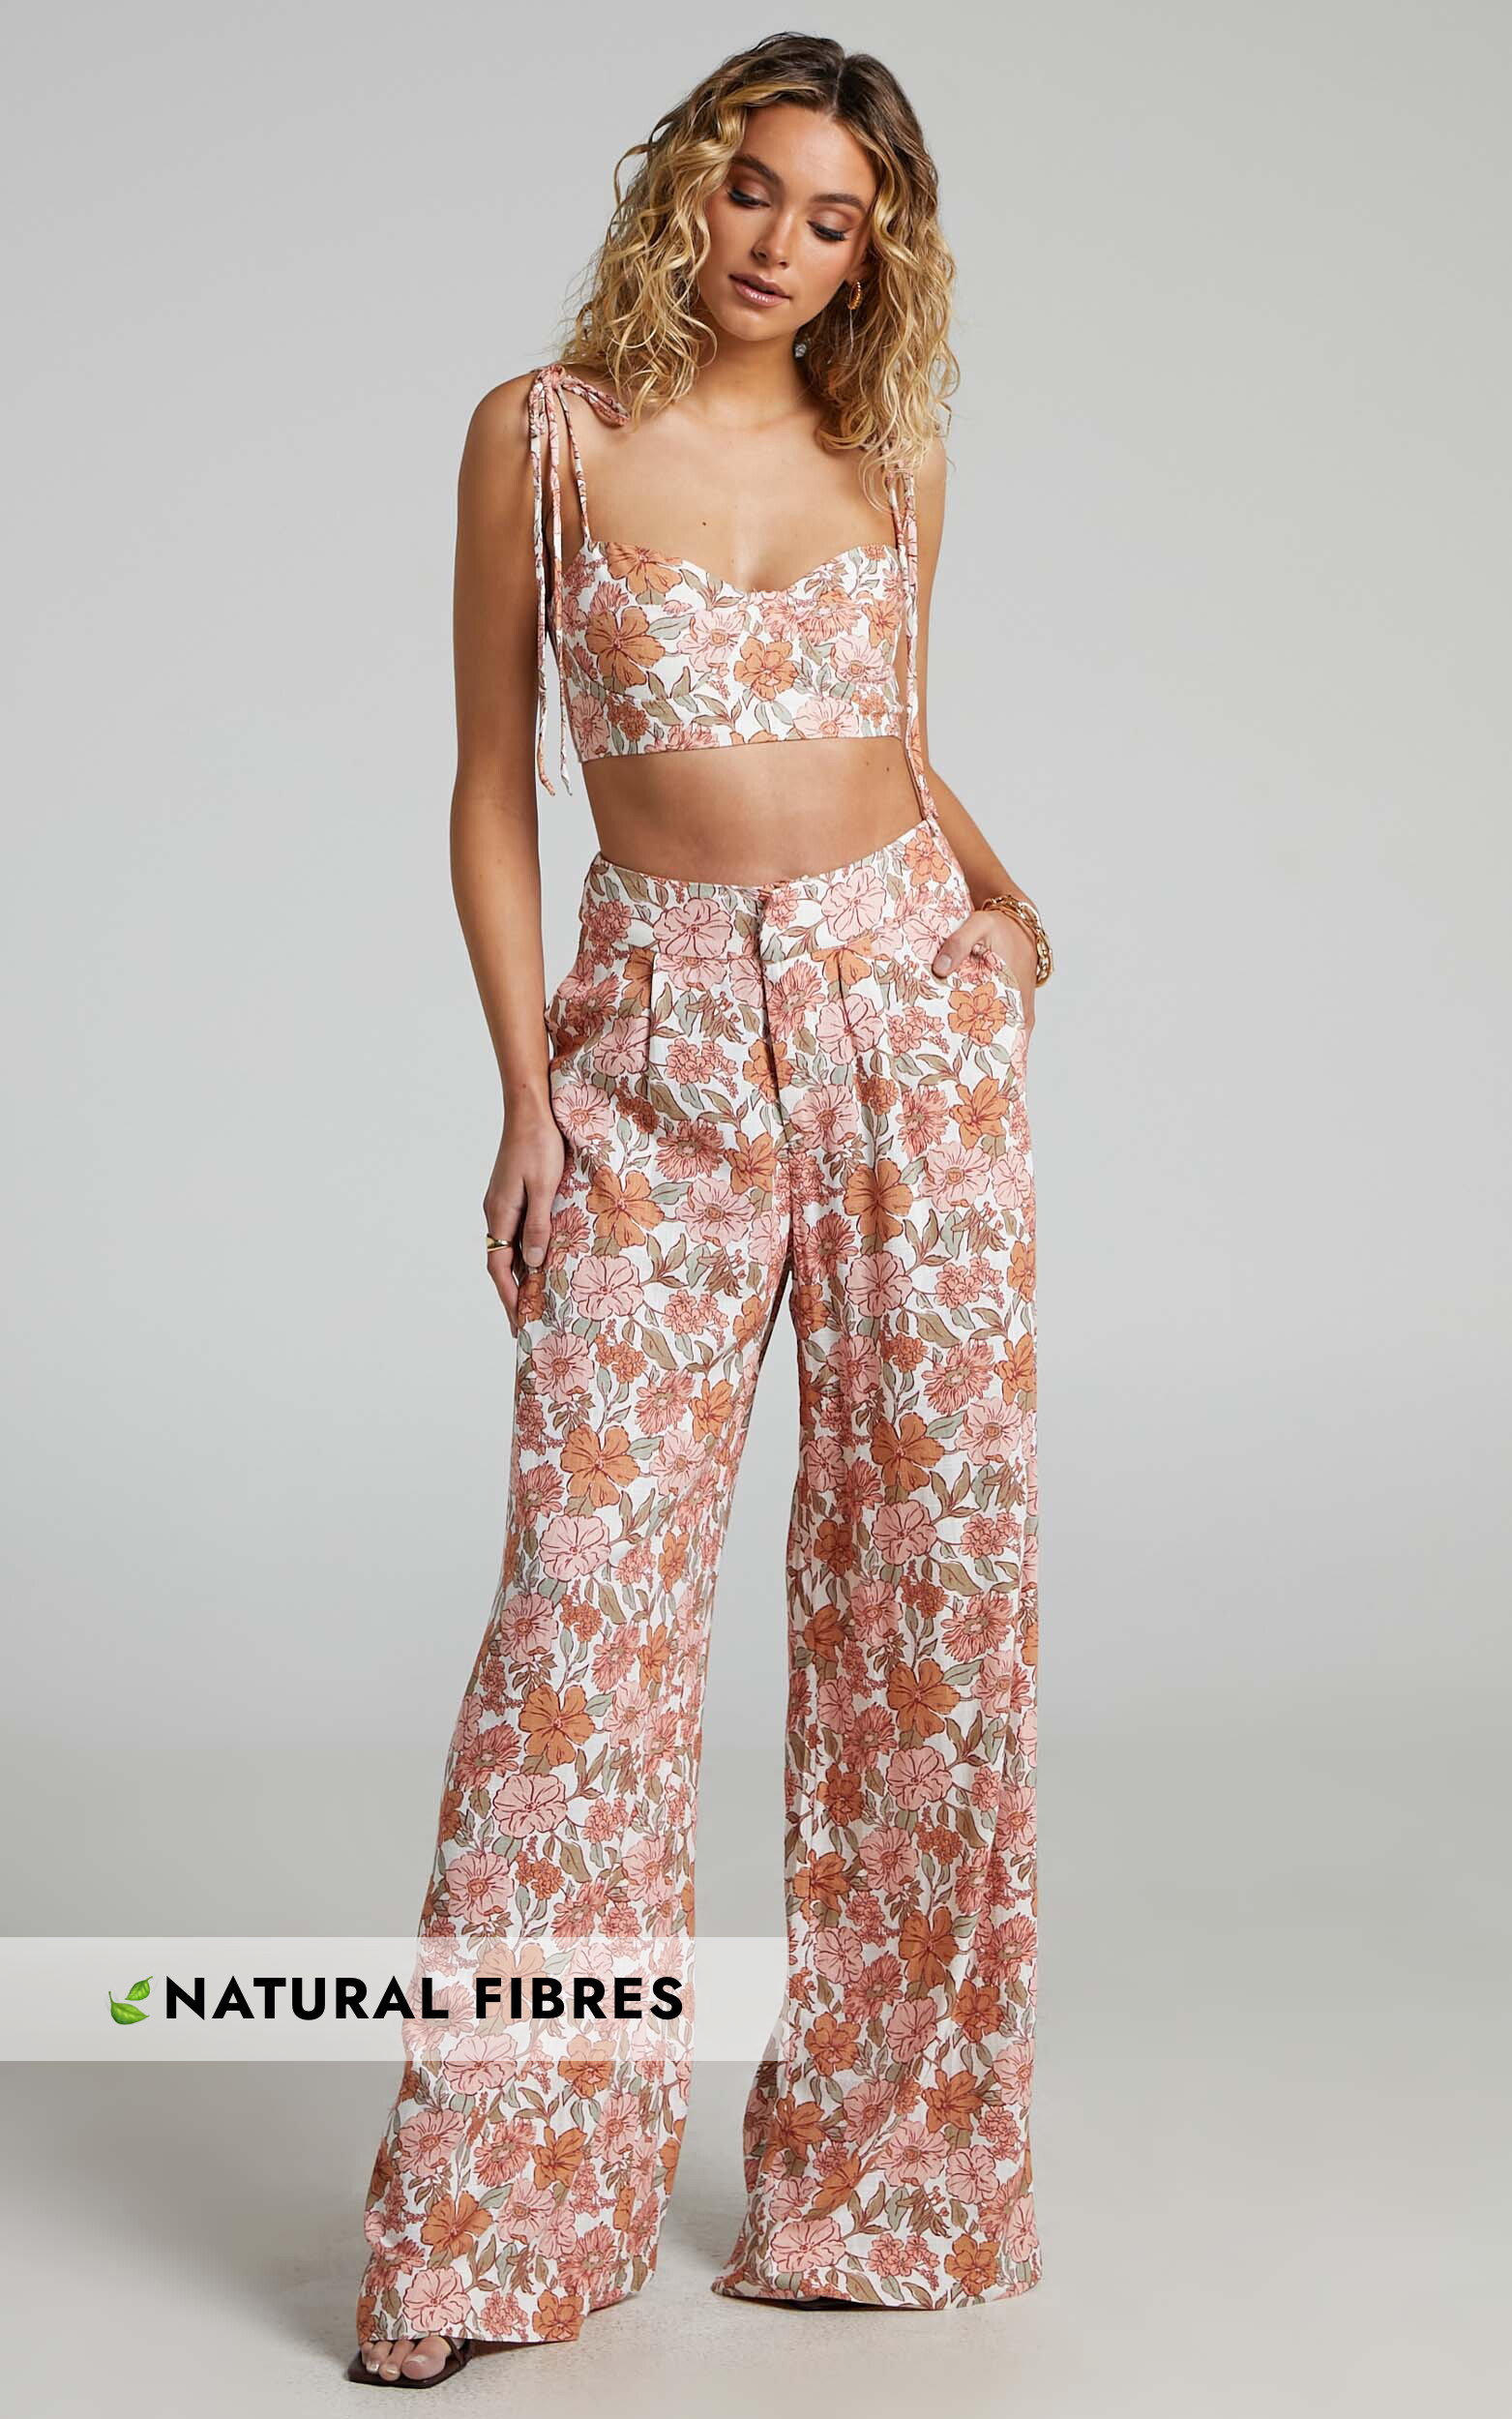 Amalie The Label - Lorete High Rise Wide Leg Pants in Wildflower Floral - 08, MLT1, hi-res image number null